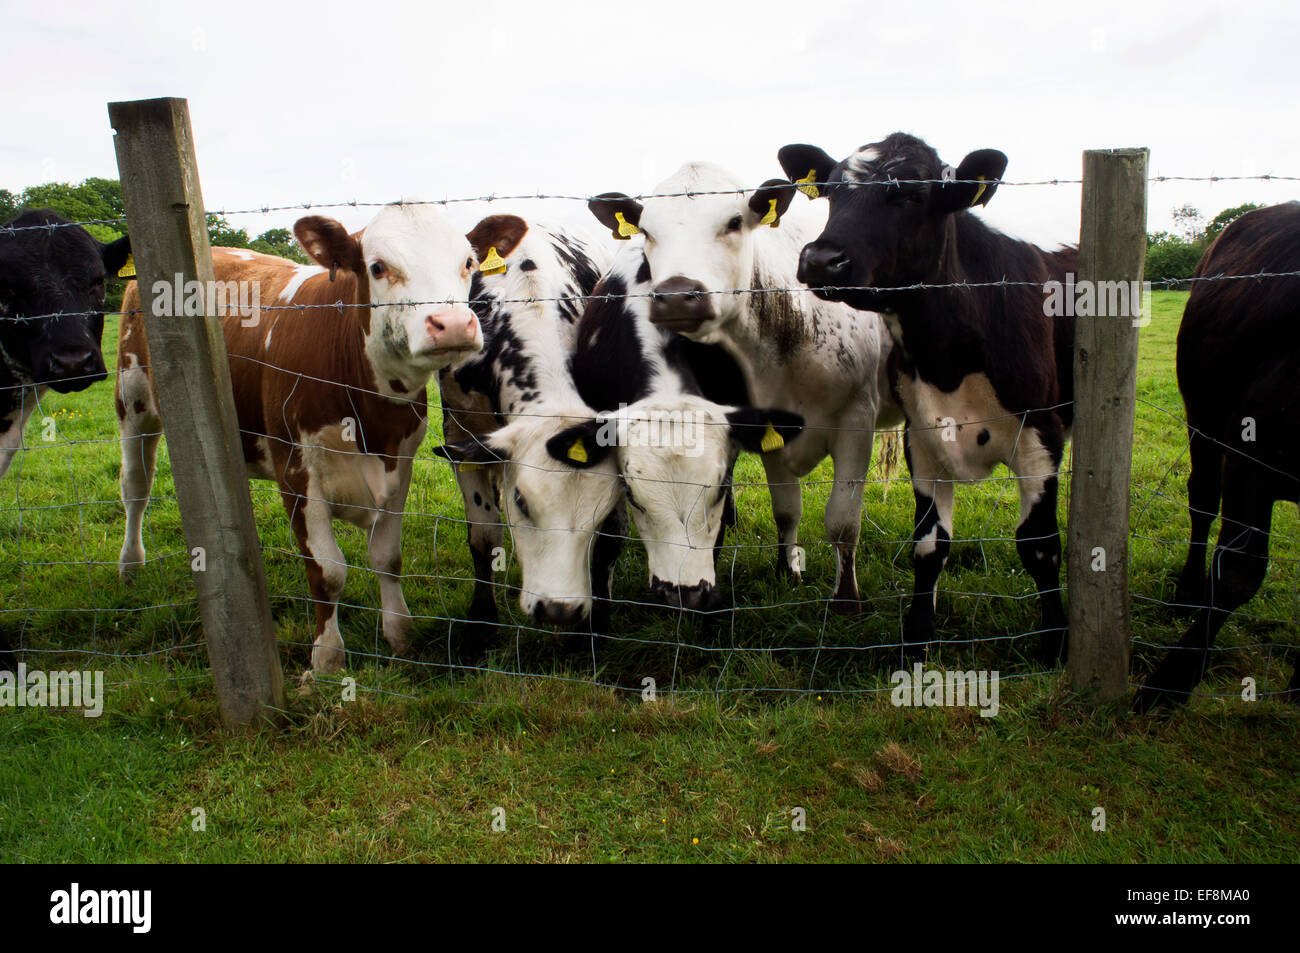 beef cattle,  stock raising, keeping livestock, grazing, steer, bullock, barbed wire fencing Stock Photo